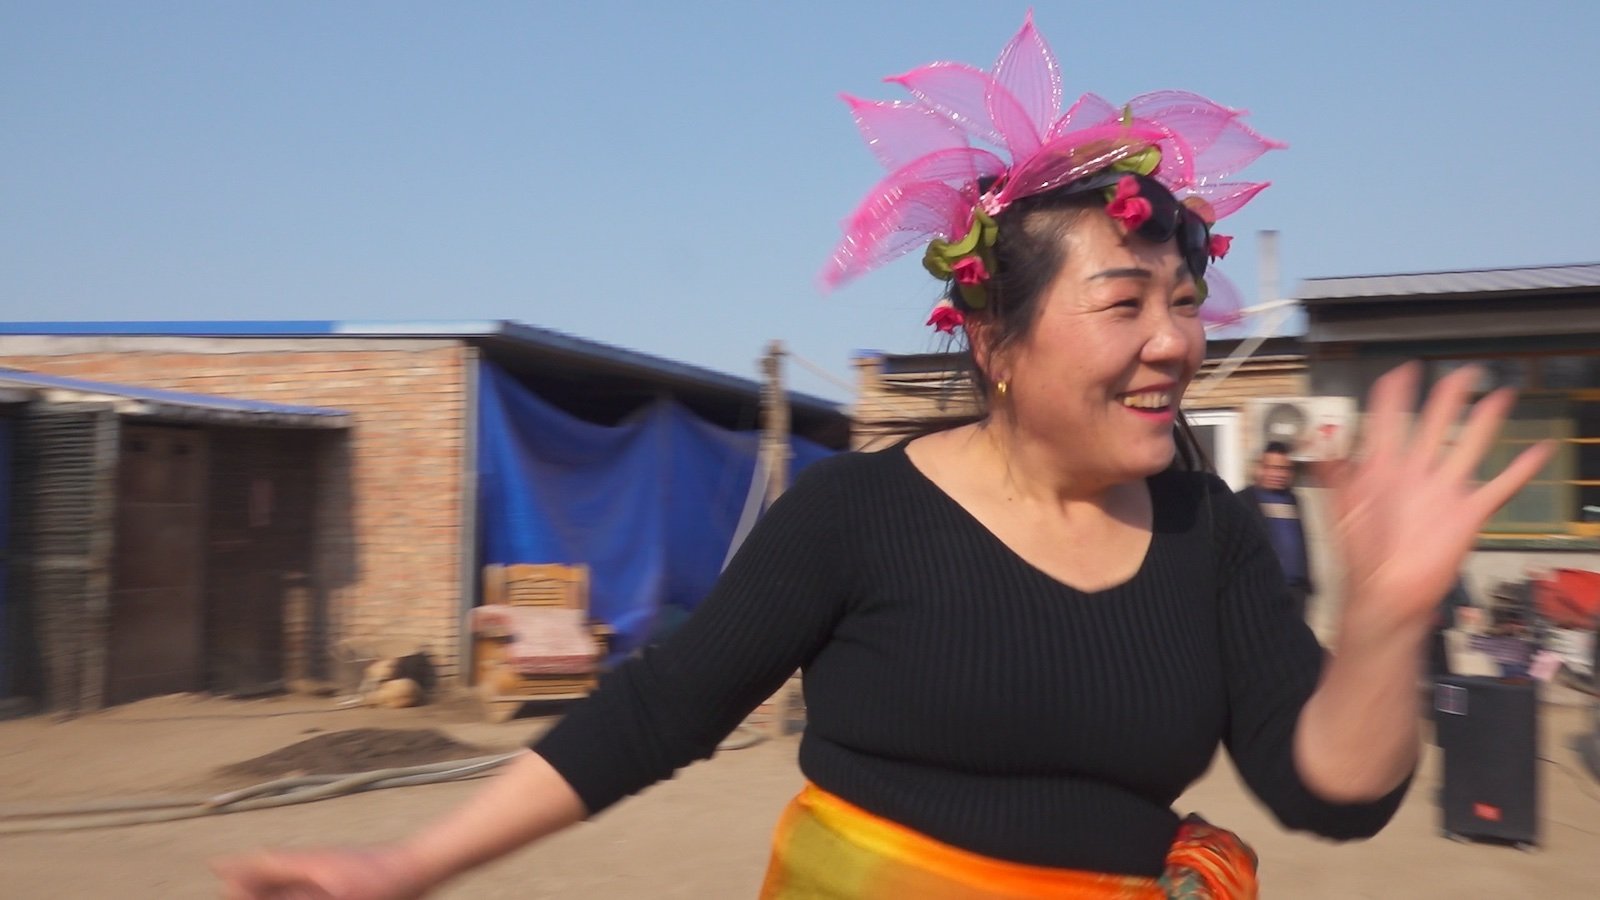 A woman with a flowery pink hat dances outside